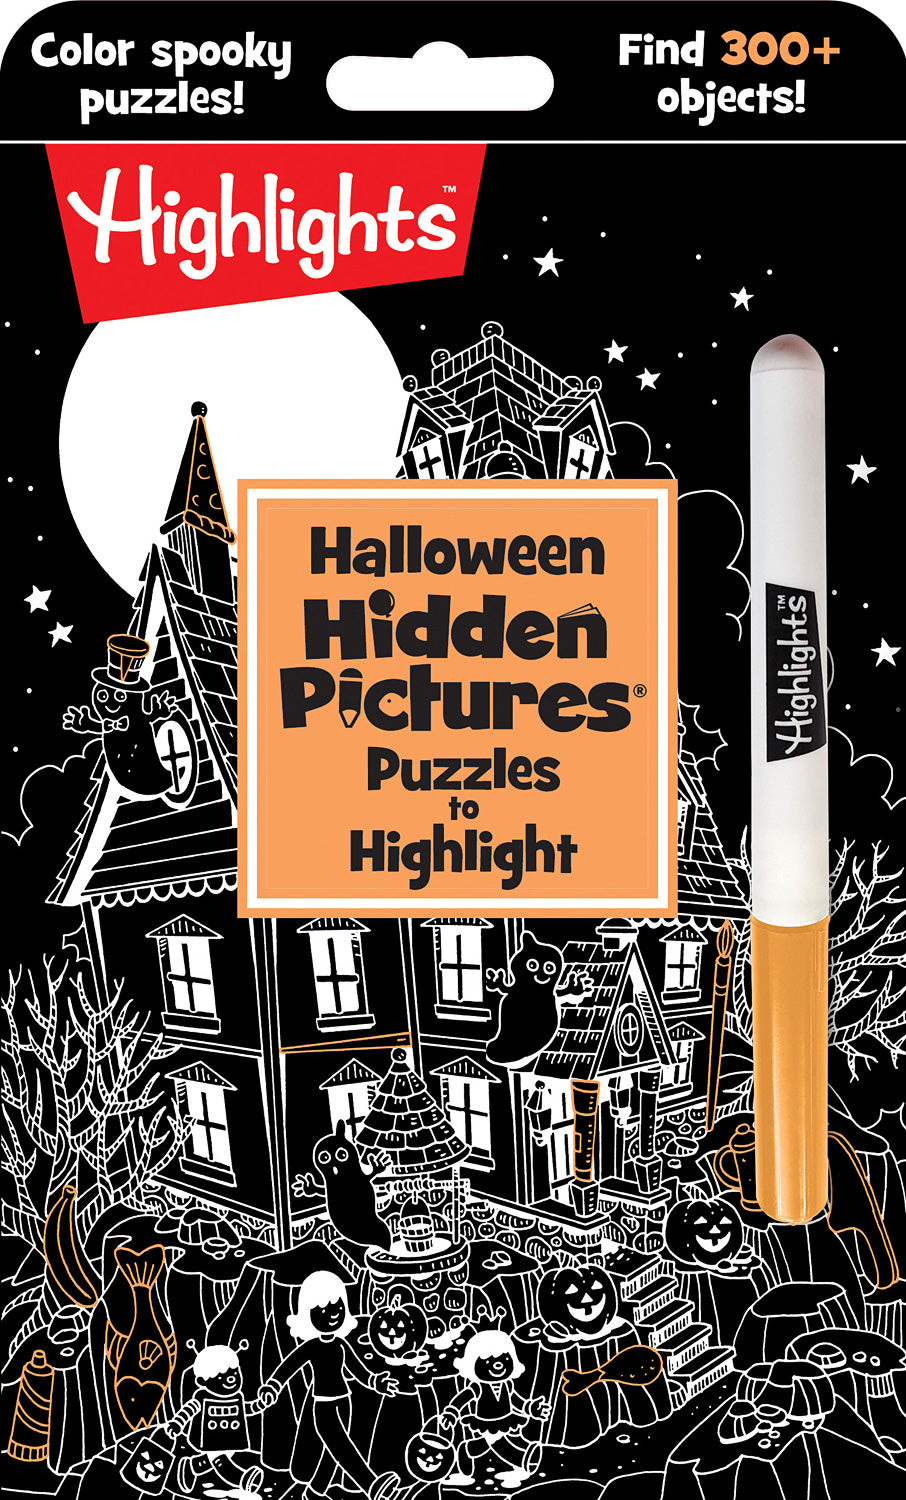 Highlights Halloween Hidden Pictures Puzzles to Highlight